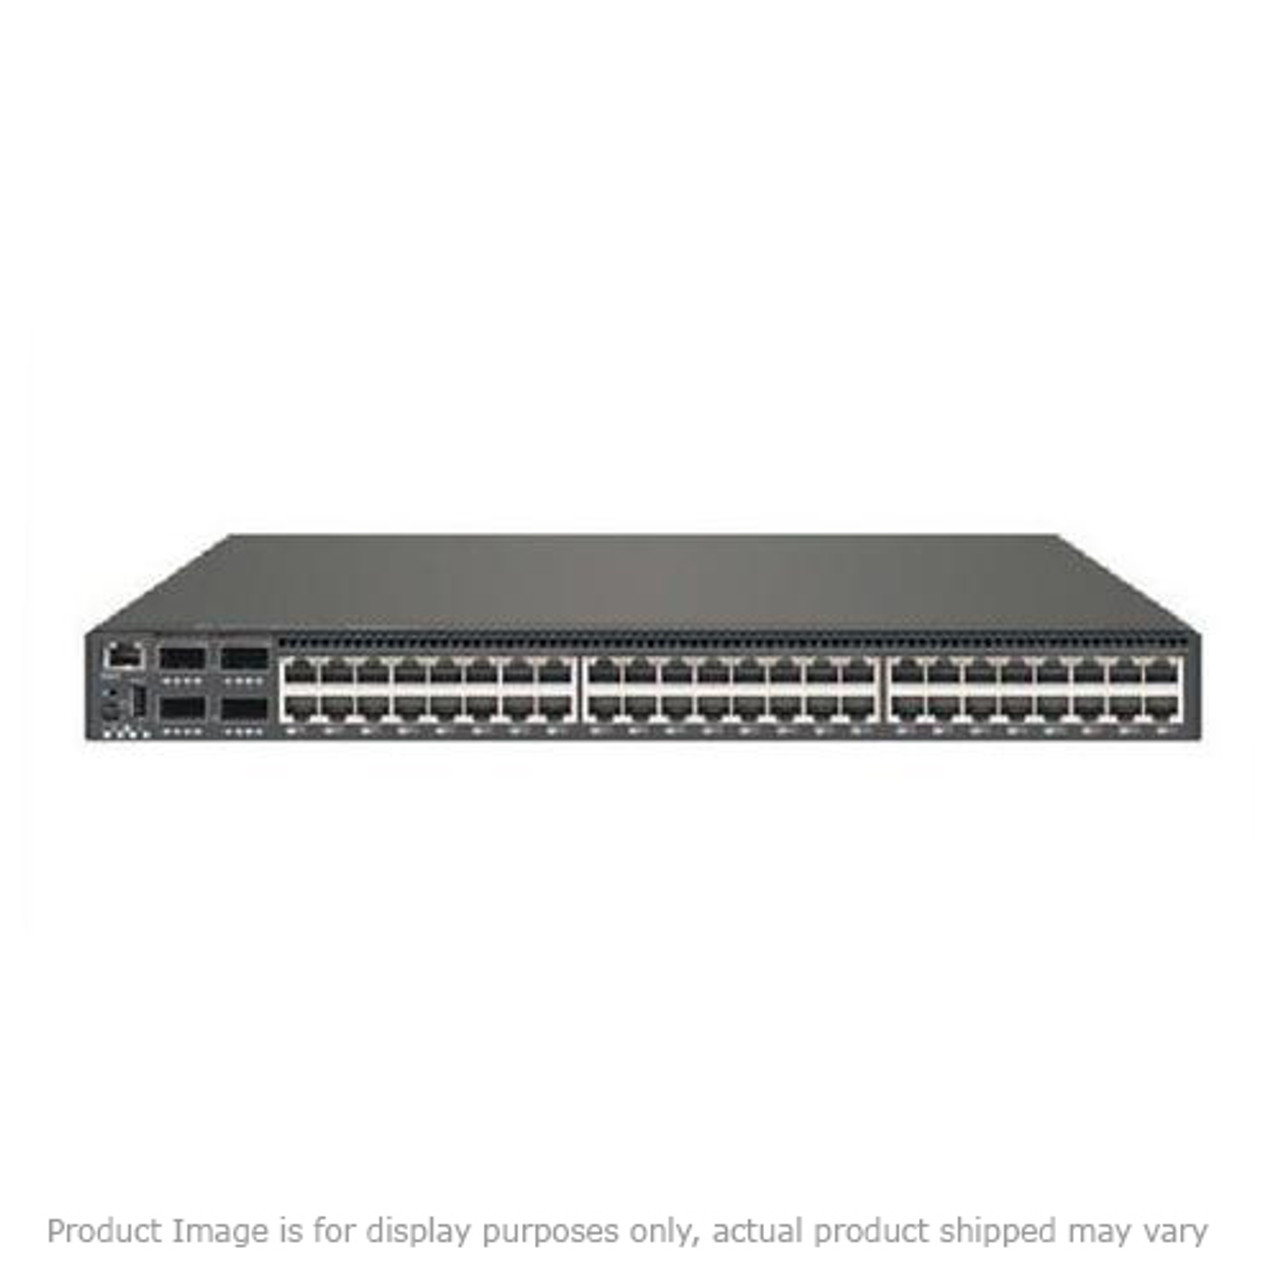 ALC050609 Cisco Catalyst 2942M-XL 24-Ports 10/100 Autosensing Switch 2 Expansion Slots (Refurbished)